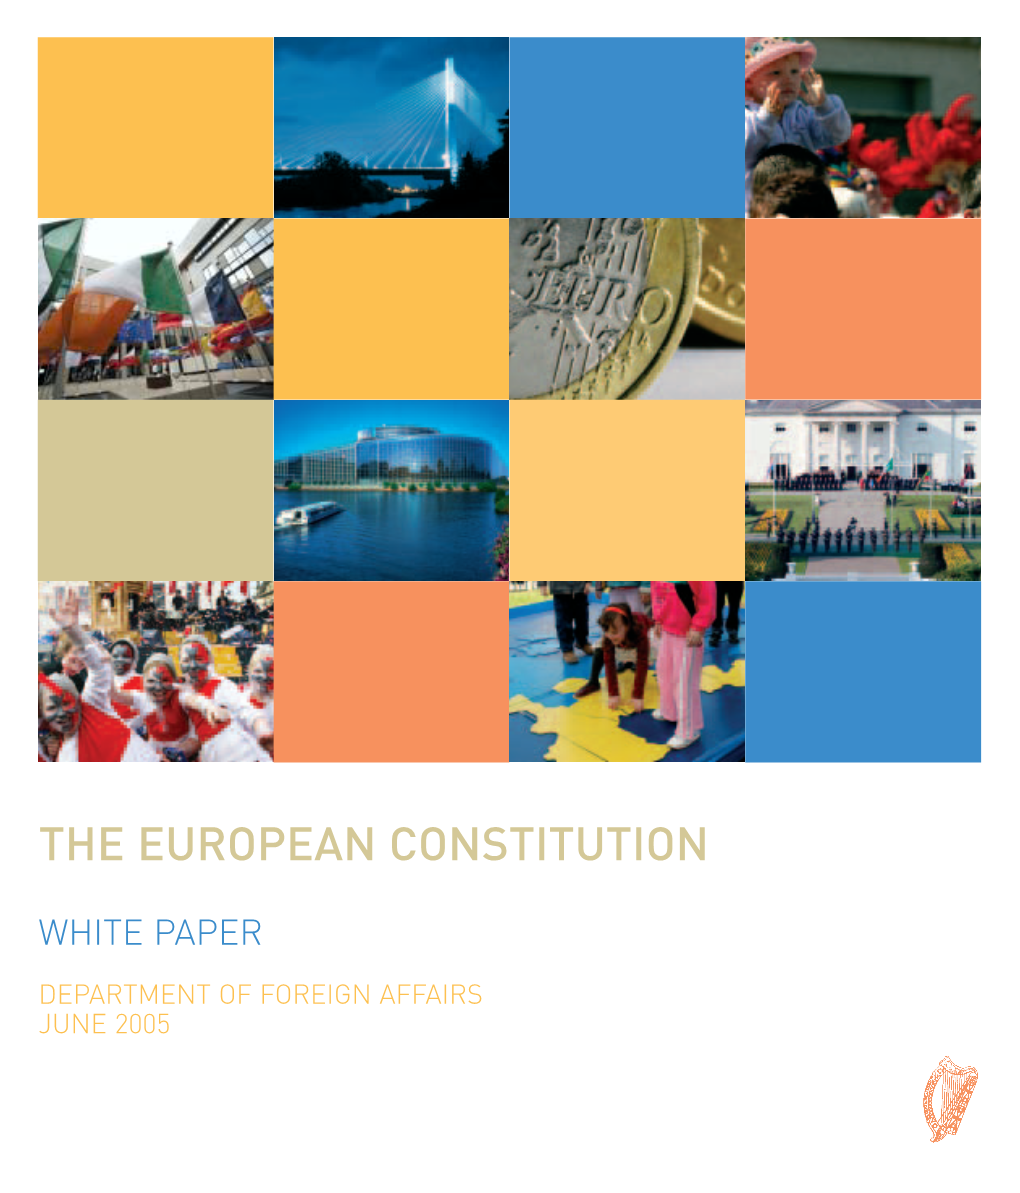 White Paper on the European Constitution